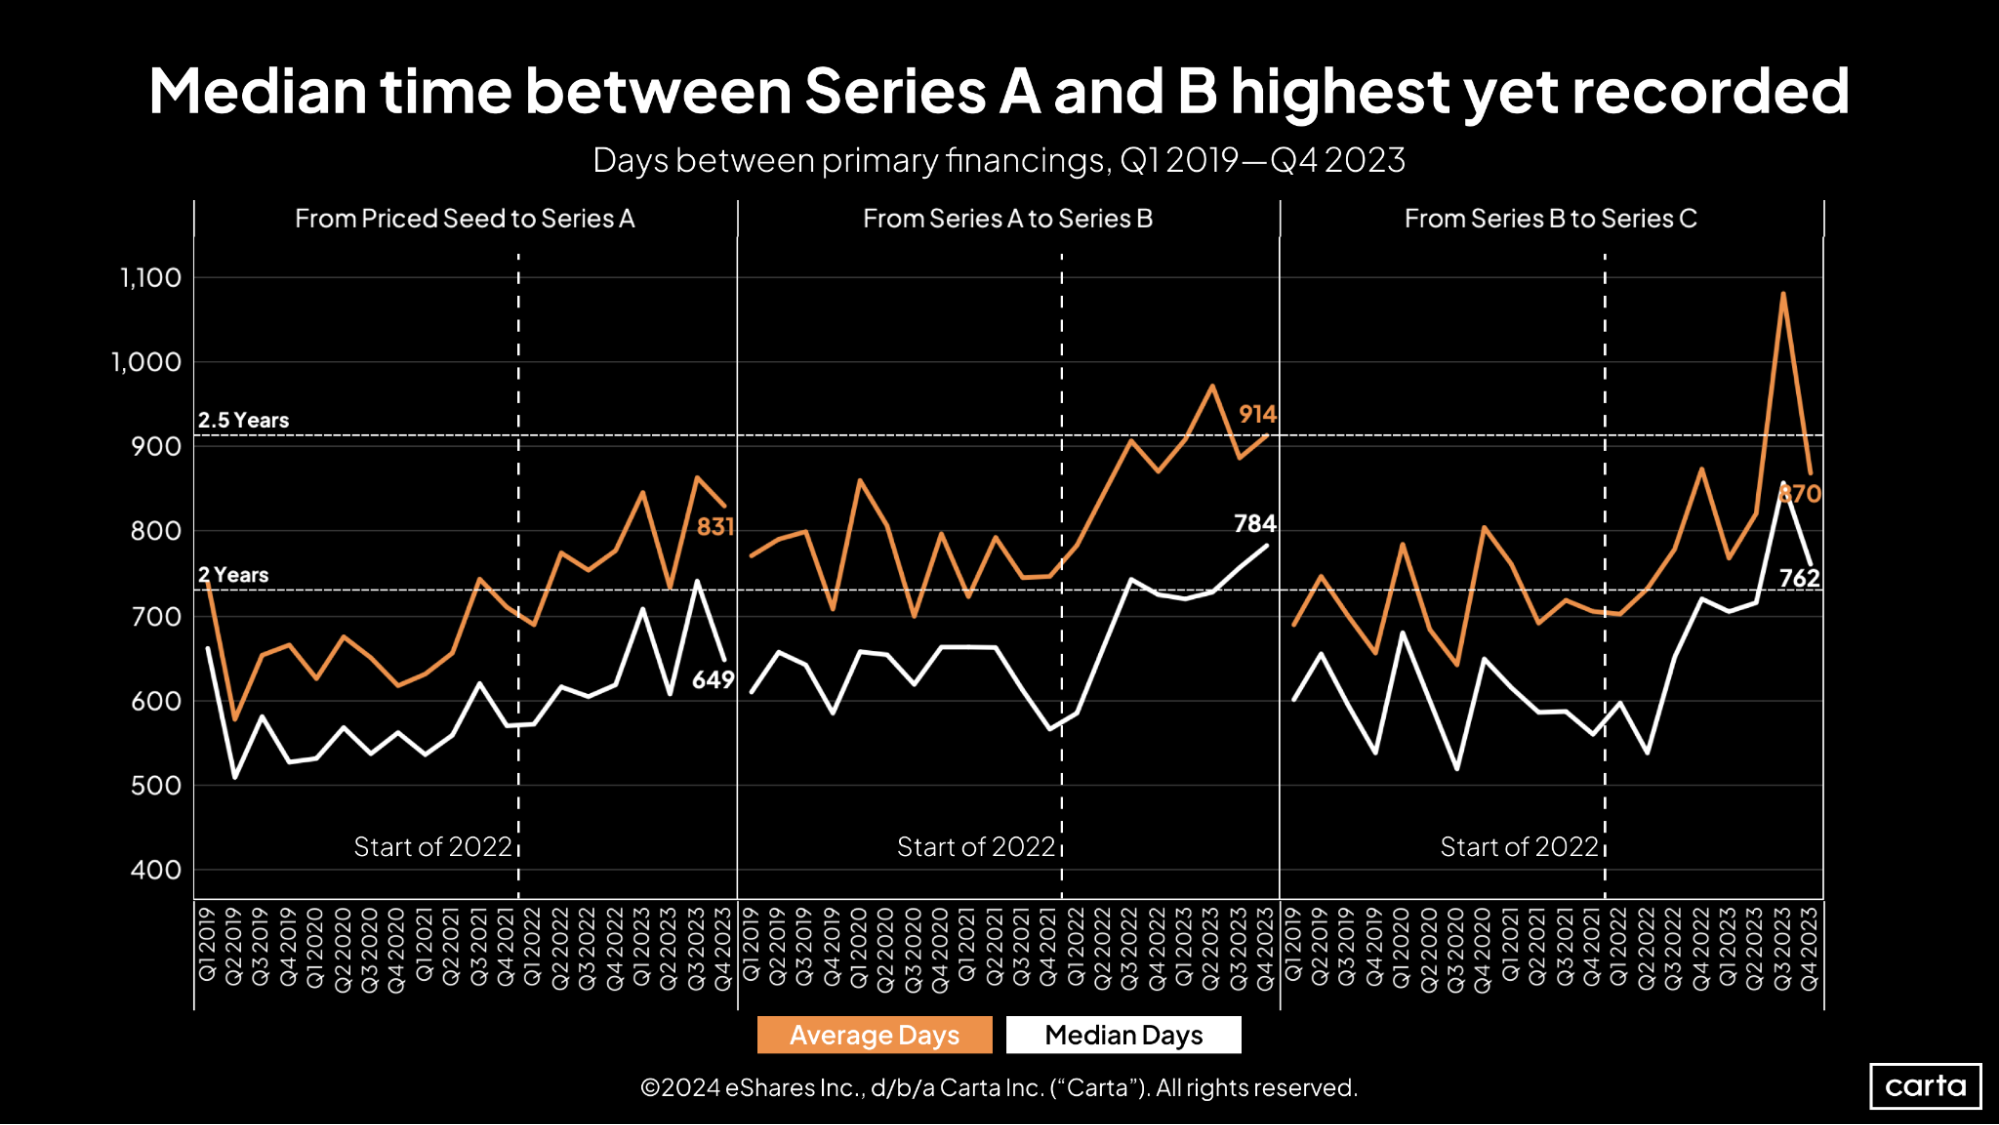 Carta SOPM Q4 2023 Median time between Series A and B highest yet recorded